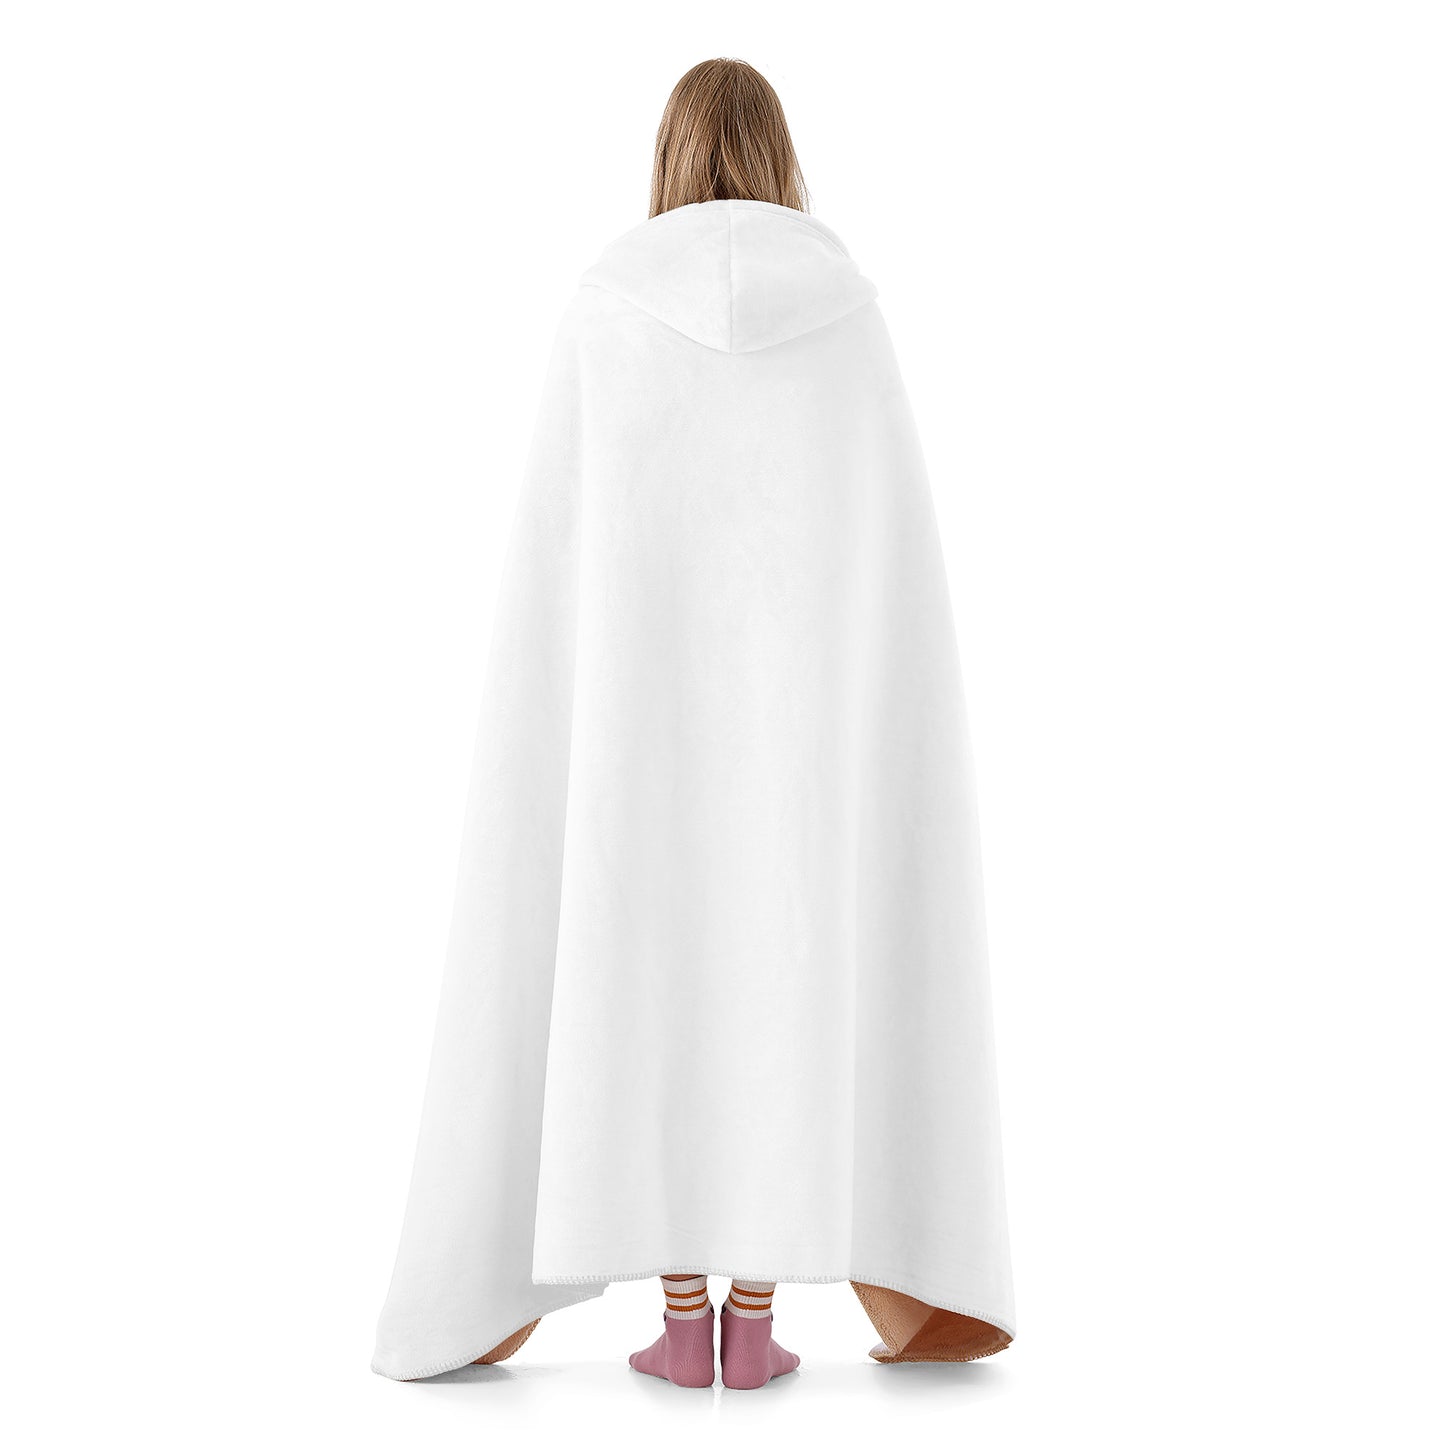 Create Your own - Hooded Blanket